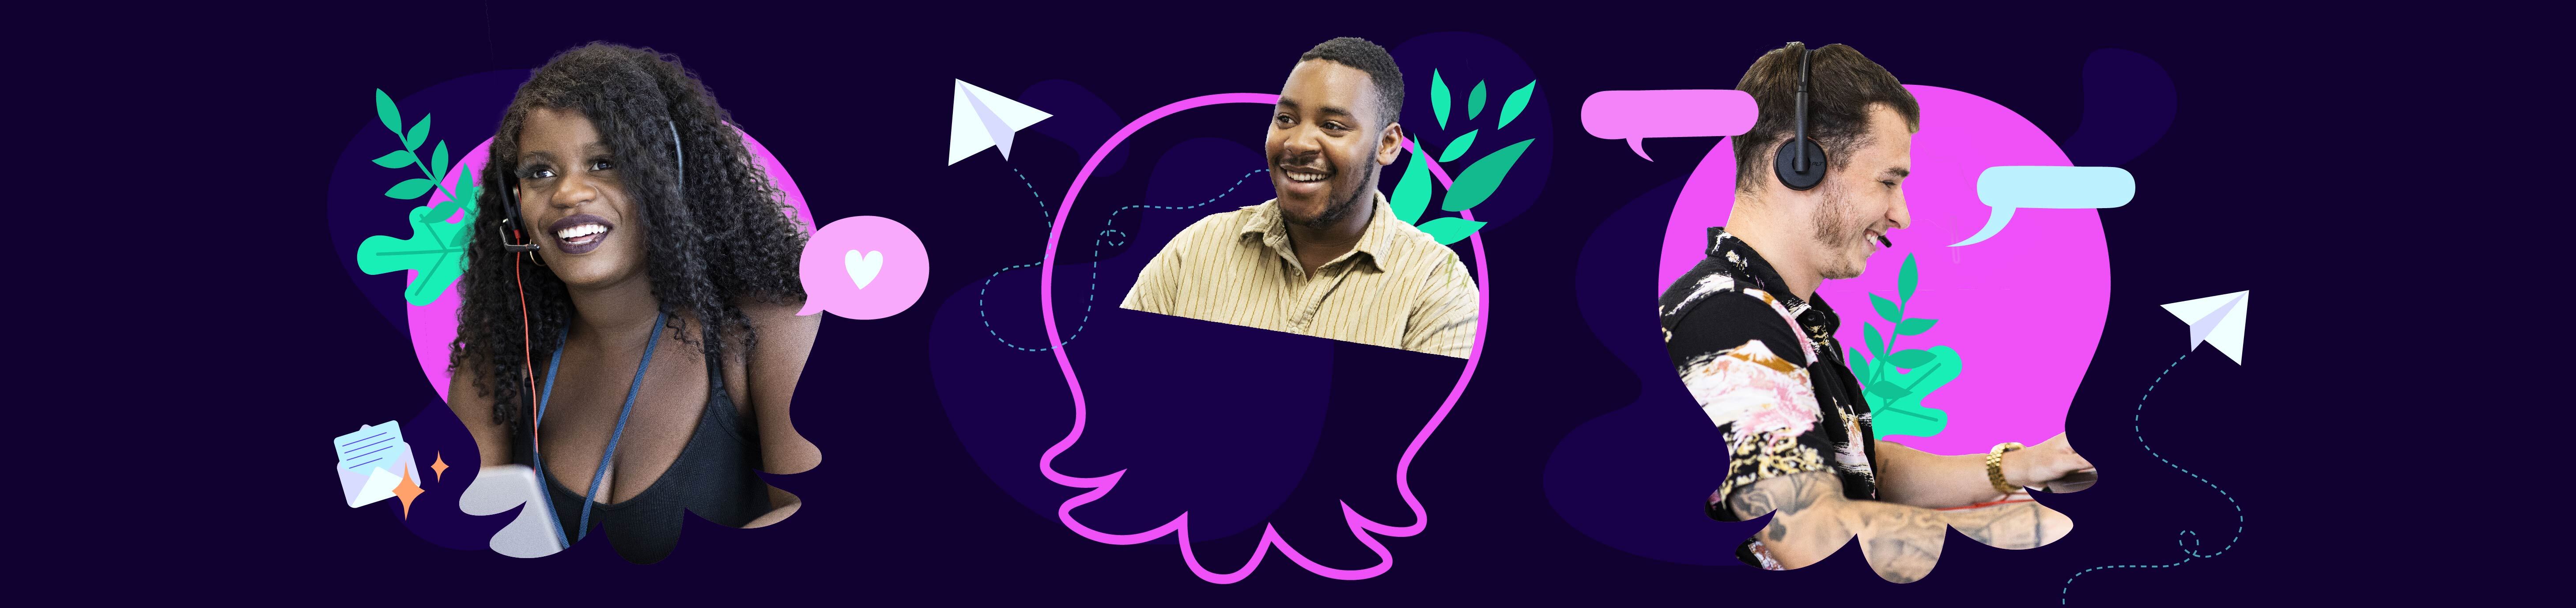 Photos of three members of our operations team answering phone calls, surrounded by illustrations of leaves, speech bubbles, and emojis